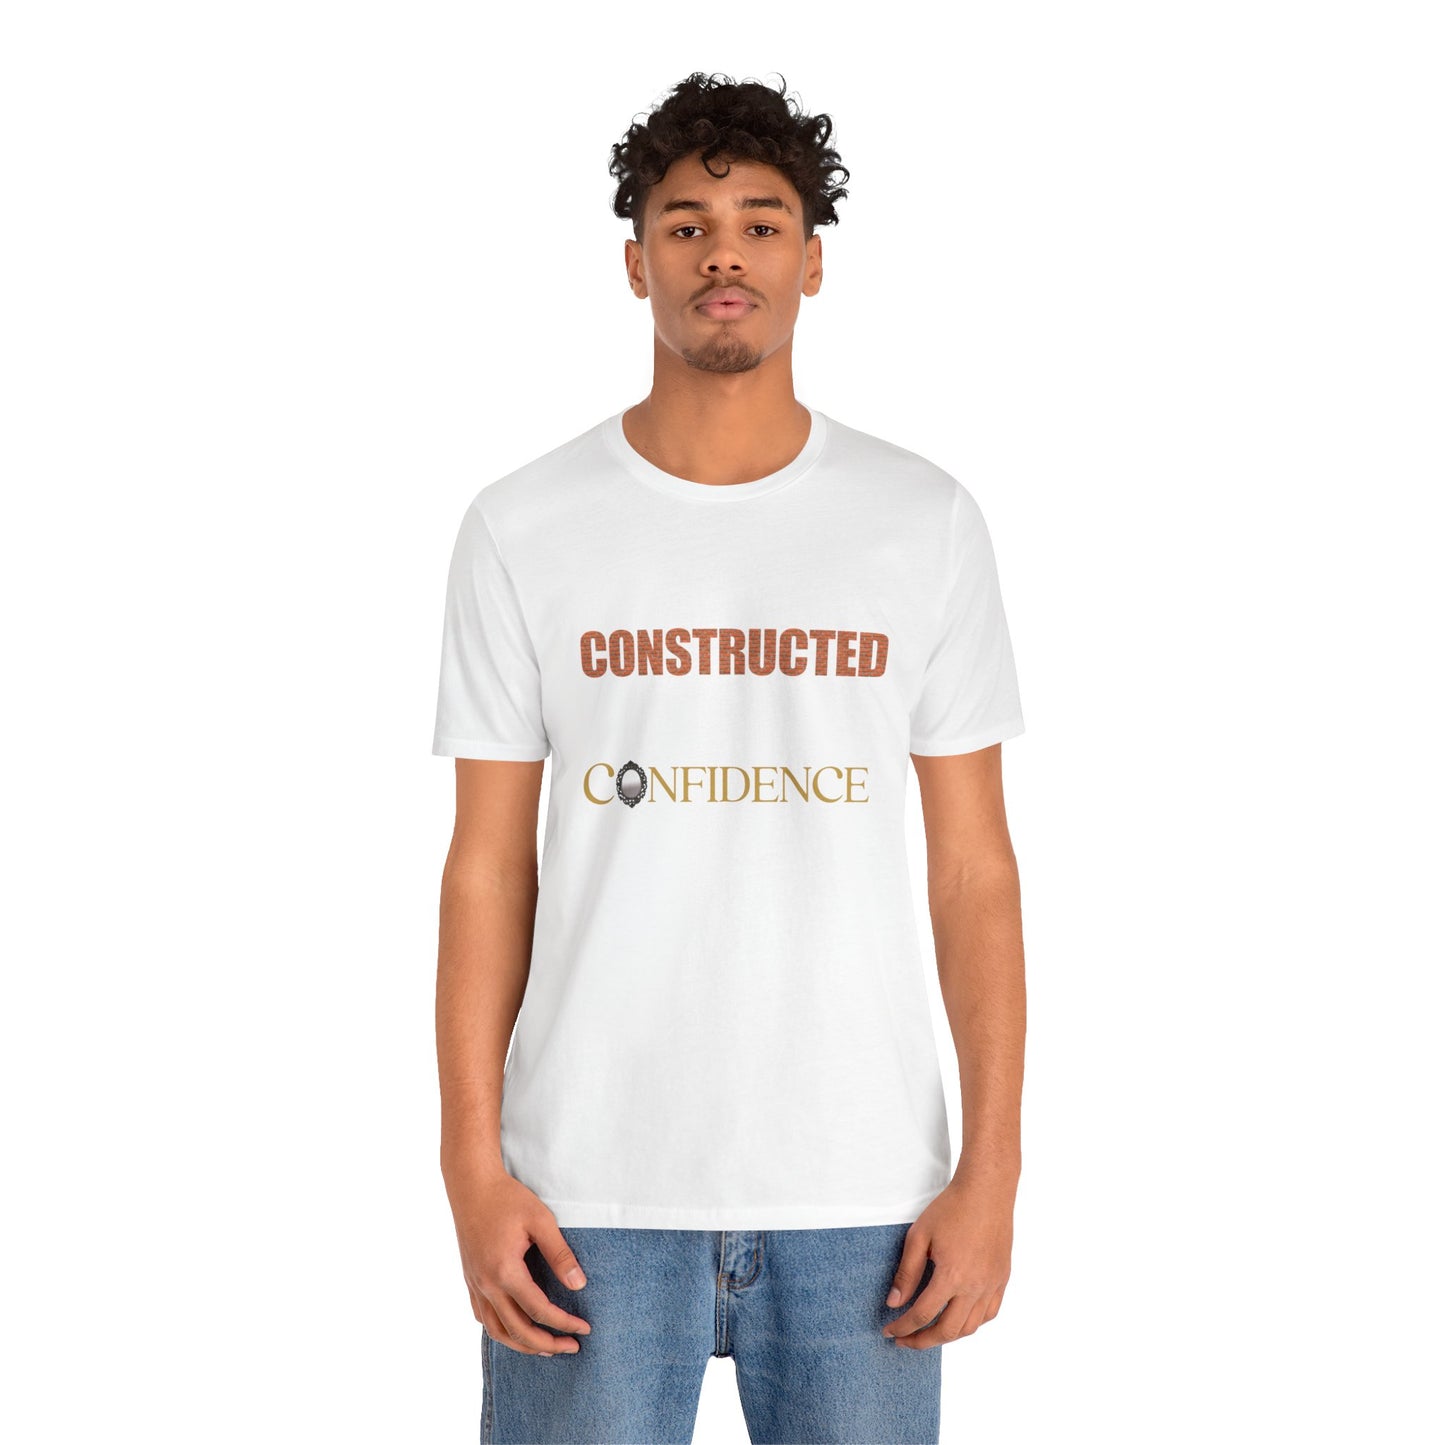 Constructed with confidence